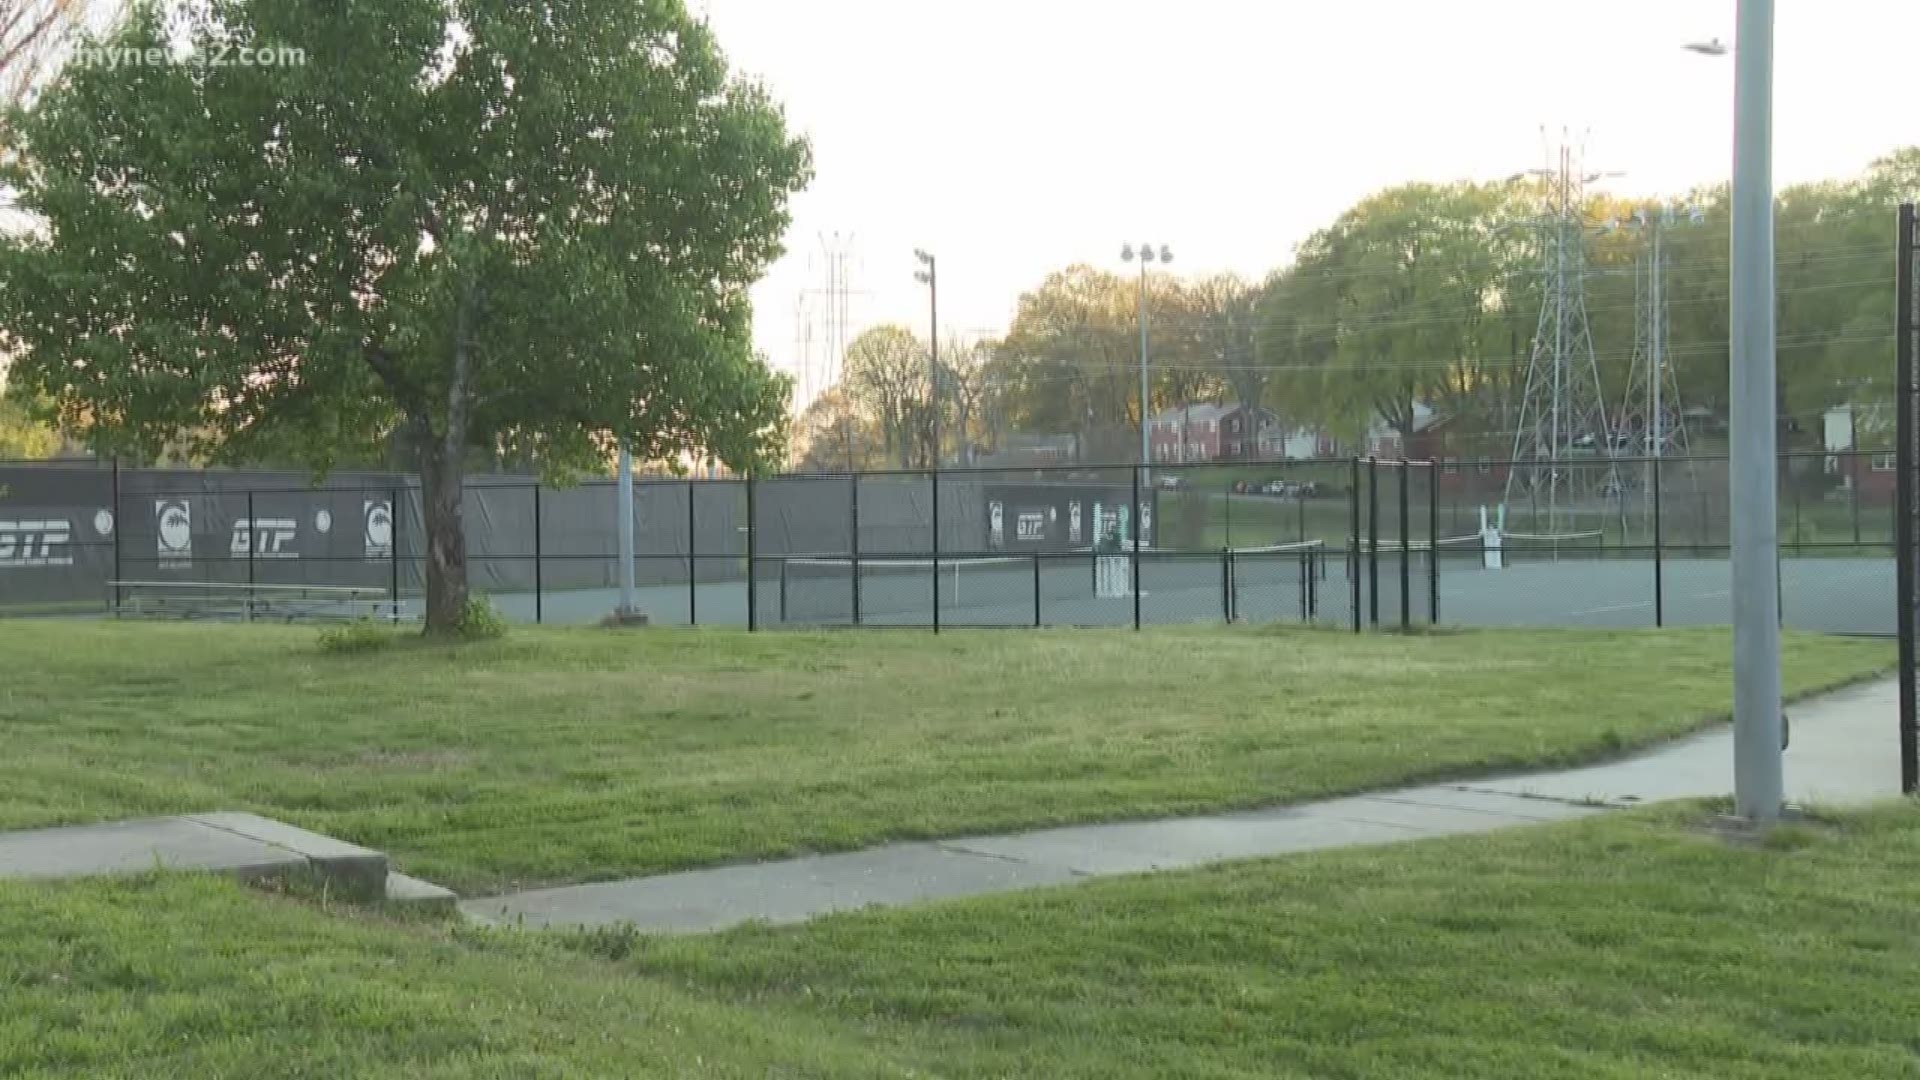 Greensboro closes basketball courts playgrounds and skate parks